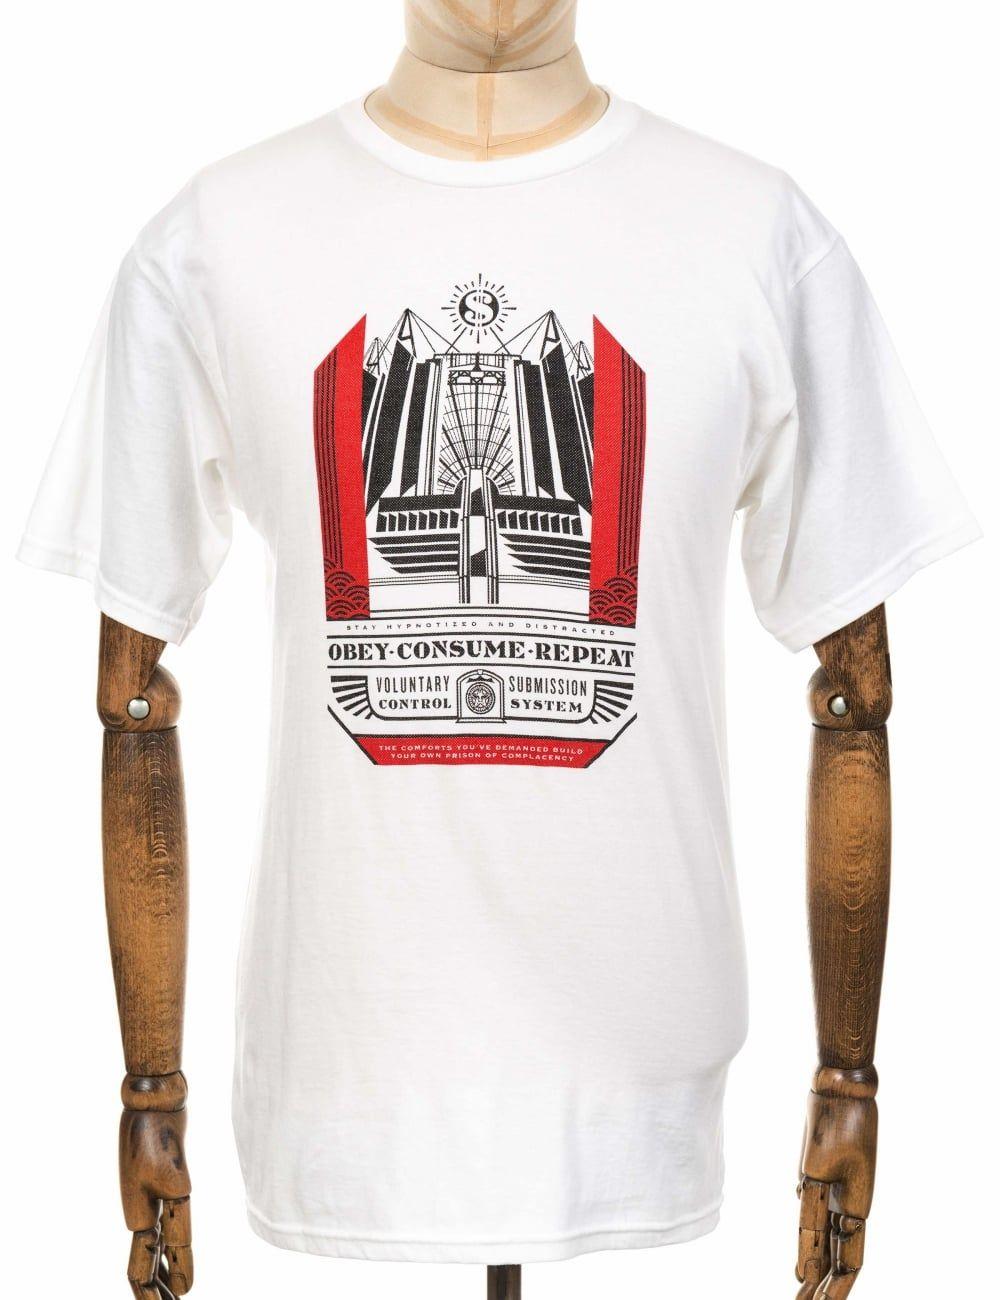 OBEY Clothing Logo - Obey Clothing Church Of Consumption Tee - White - Clothing from Fat ...